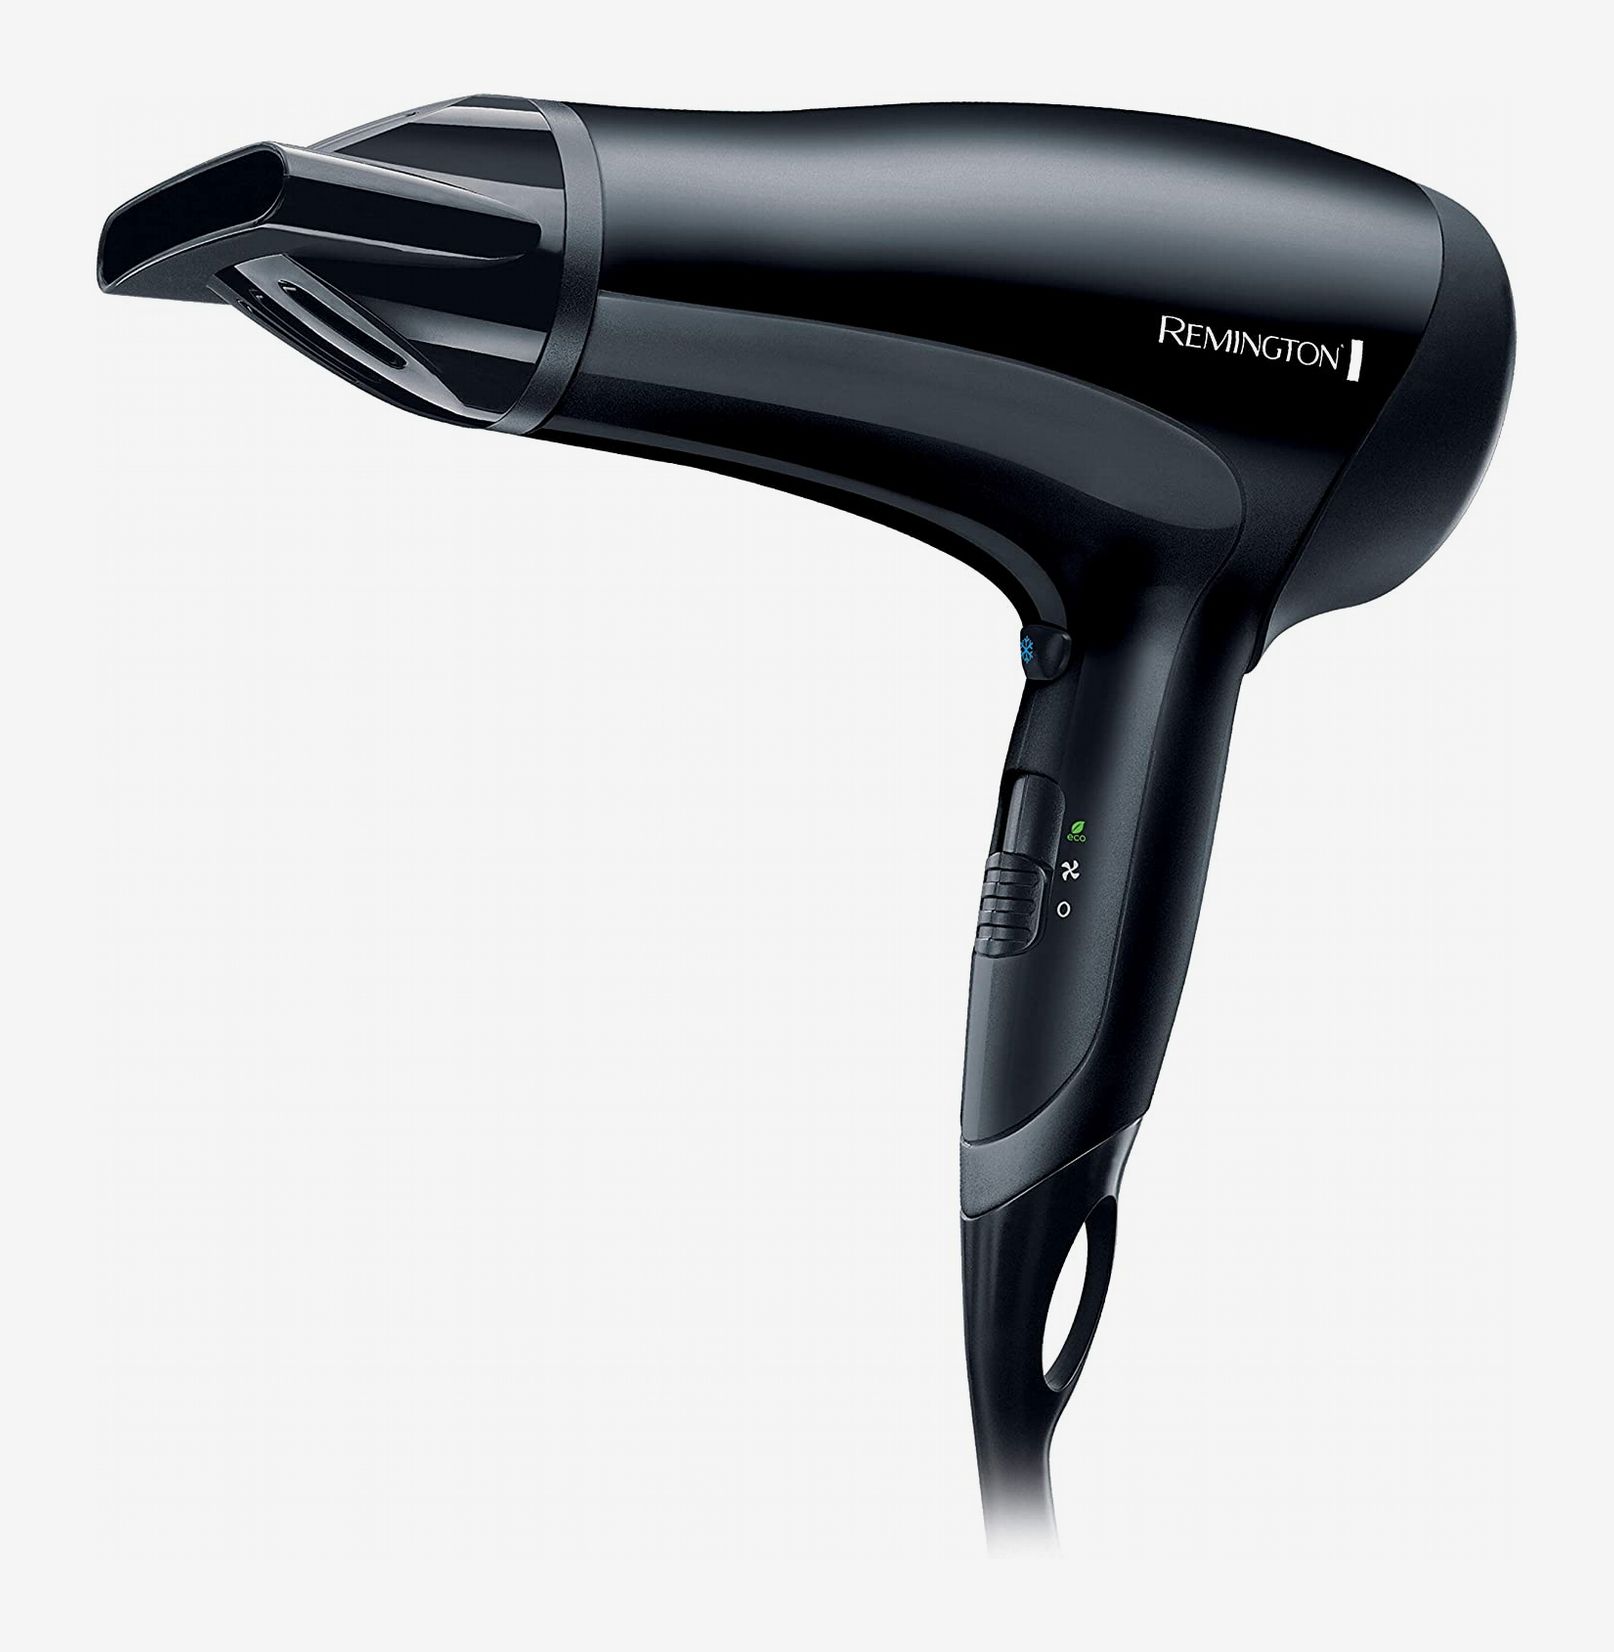 What Are The Best Hair Dryers? | The Strategist